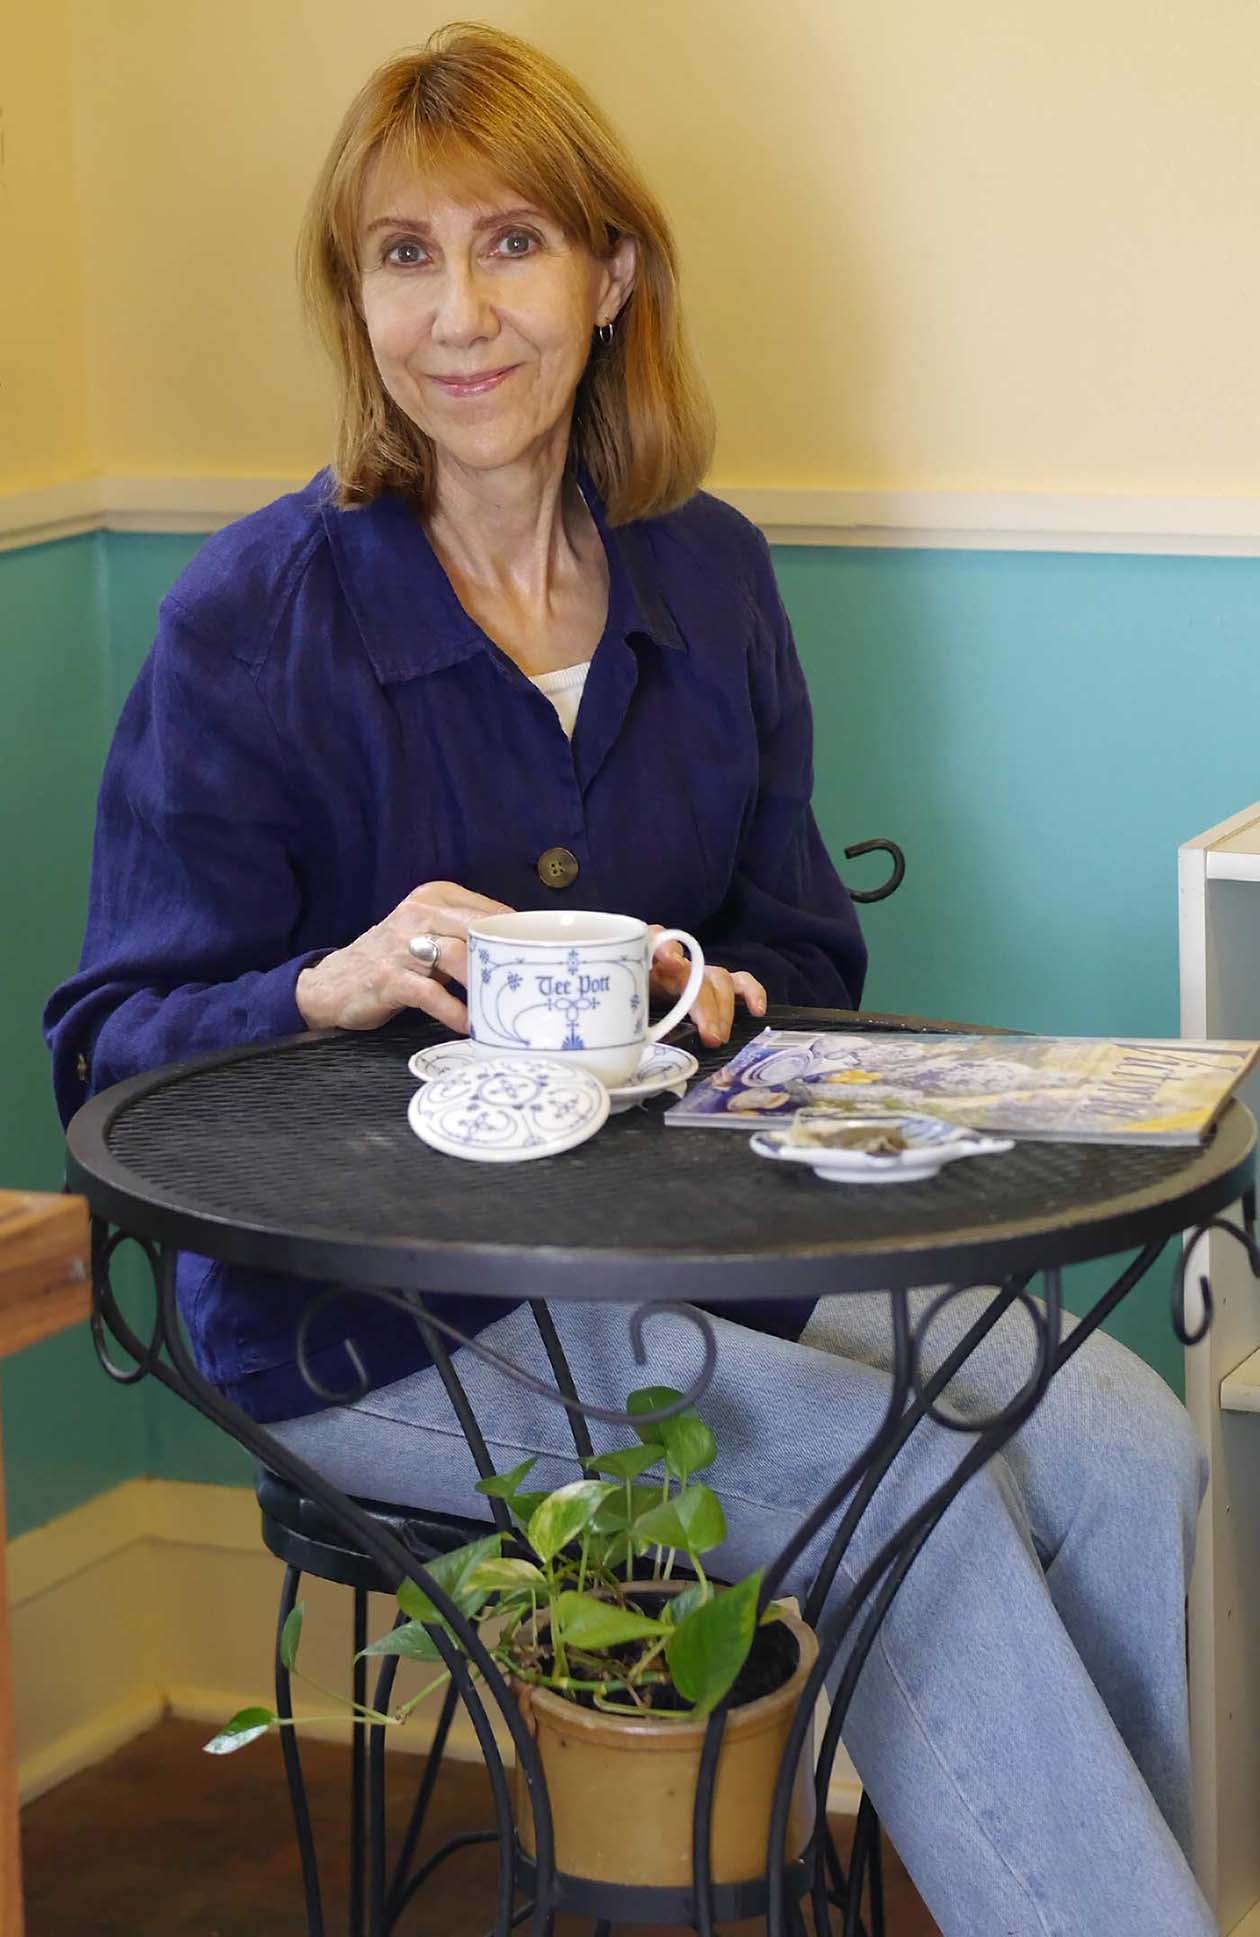 Anne seated at bistro table with tea mug and magazine.